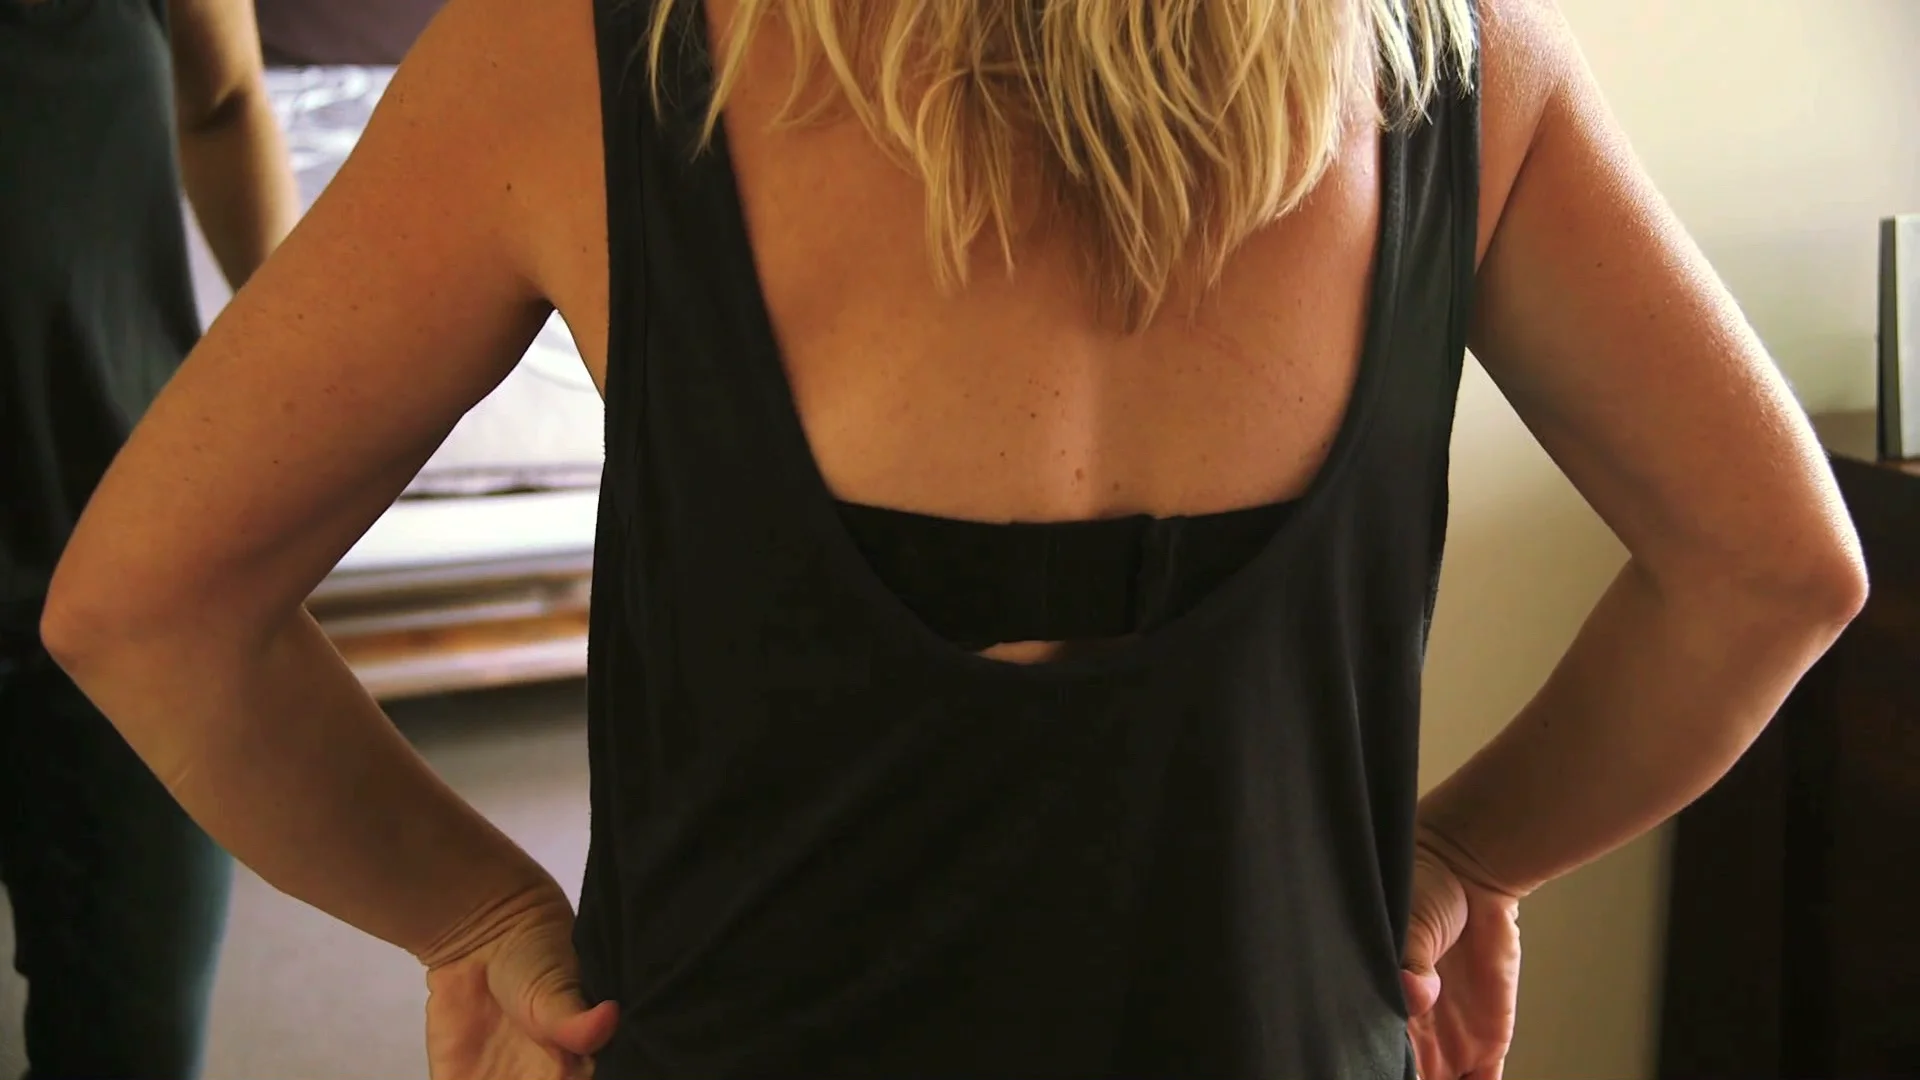 How to wear a bra with a low back dress? on Vimeo